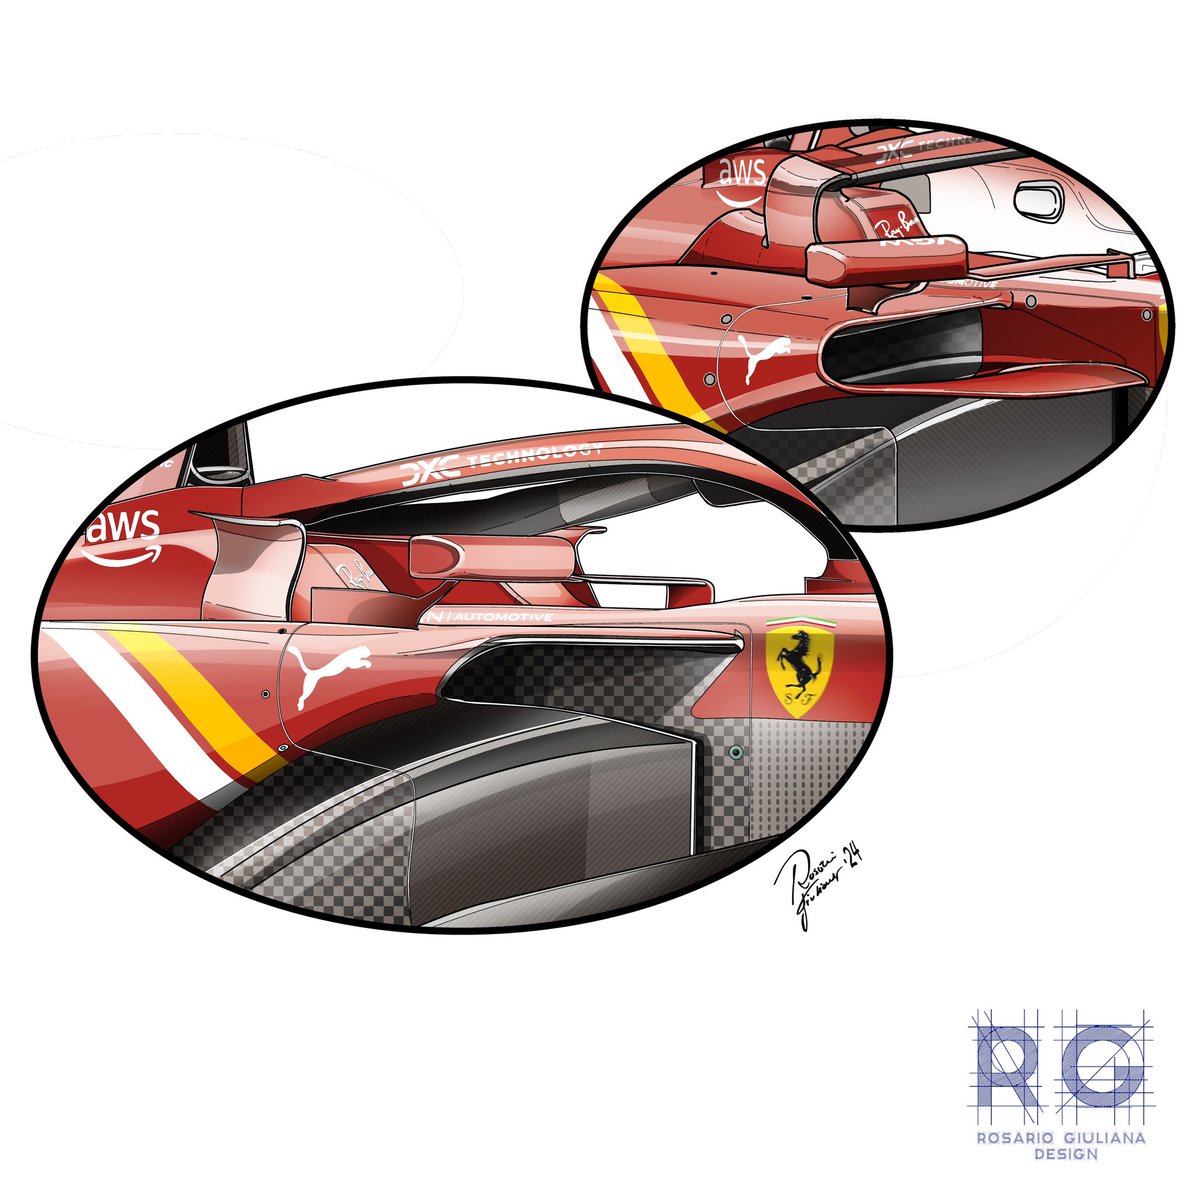 Ferrari at Fiorano approved the big update package for Imola which transforms the SF-24 into a 2.0 version. The new shark mouth cooling inlets and the abolition of the by-pass duct. The vertical inlet is now connected with the shark mouths, and has a similar shape to Alpine. The